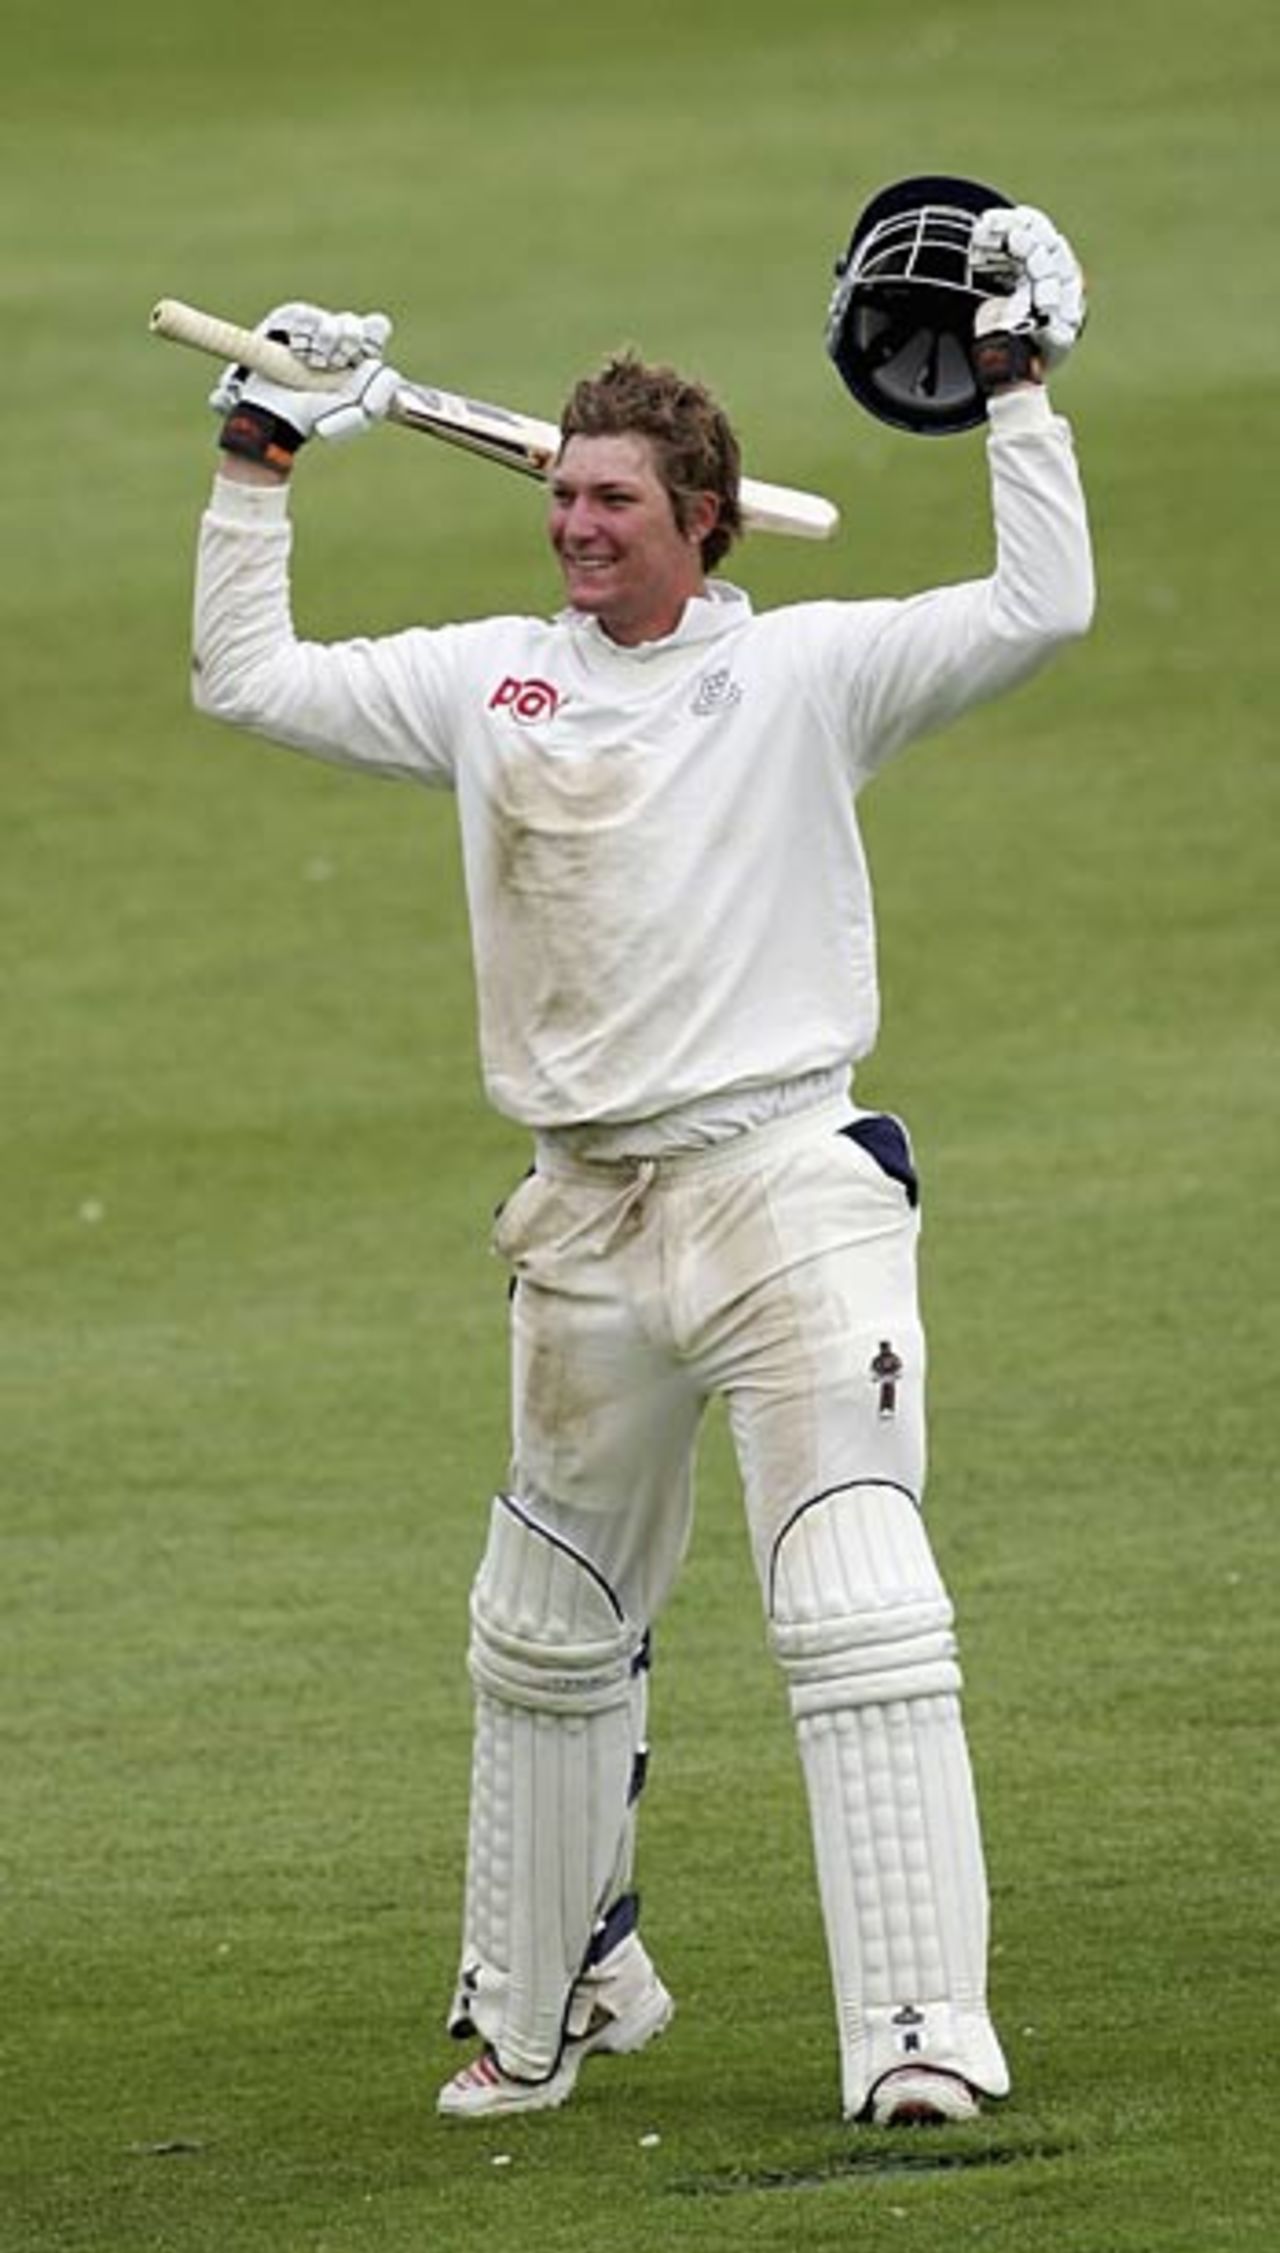 Oliver Rayner celebrates his century on debut against the Sri Lankans, Sussex v Sri Lankans, Tour Match, Hove, May 20, 2006